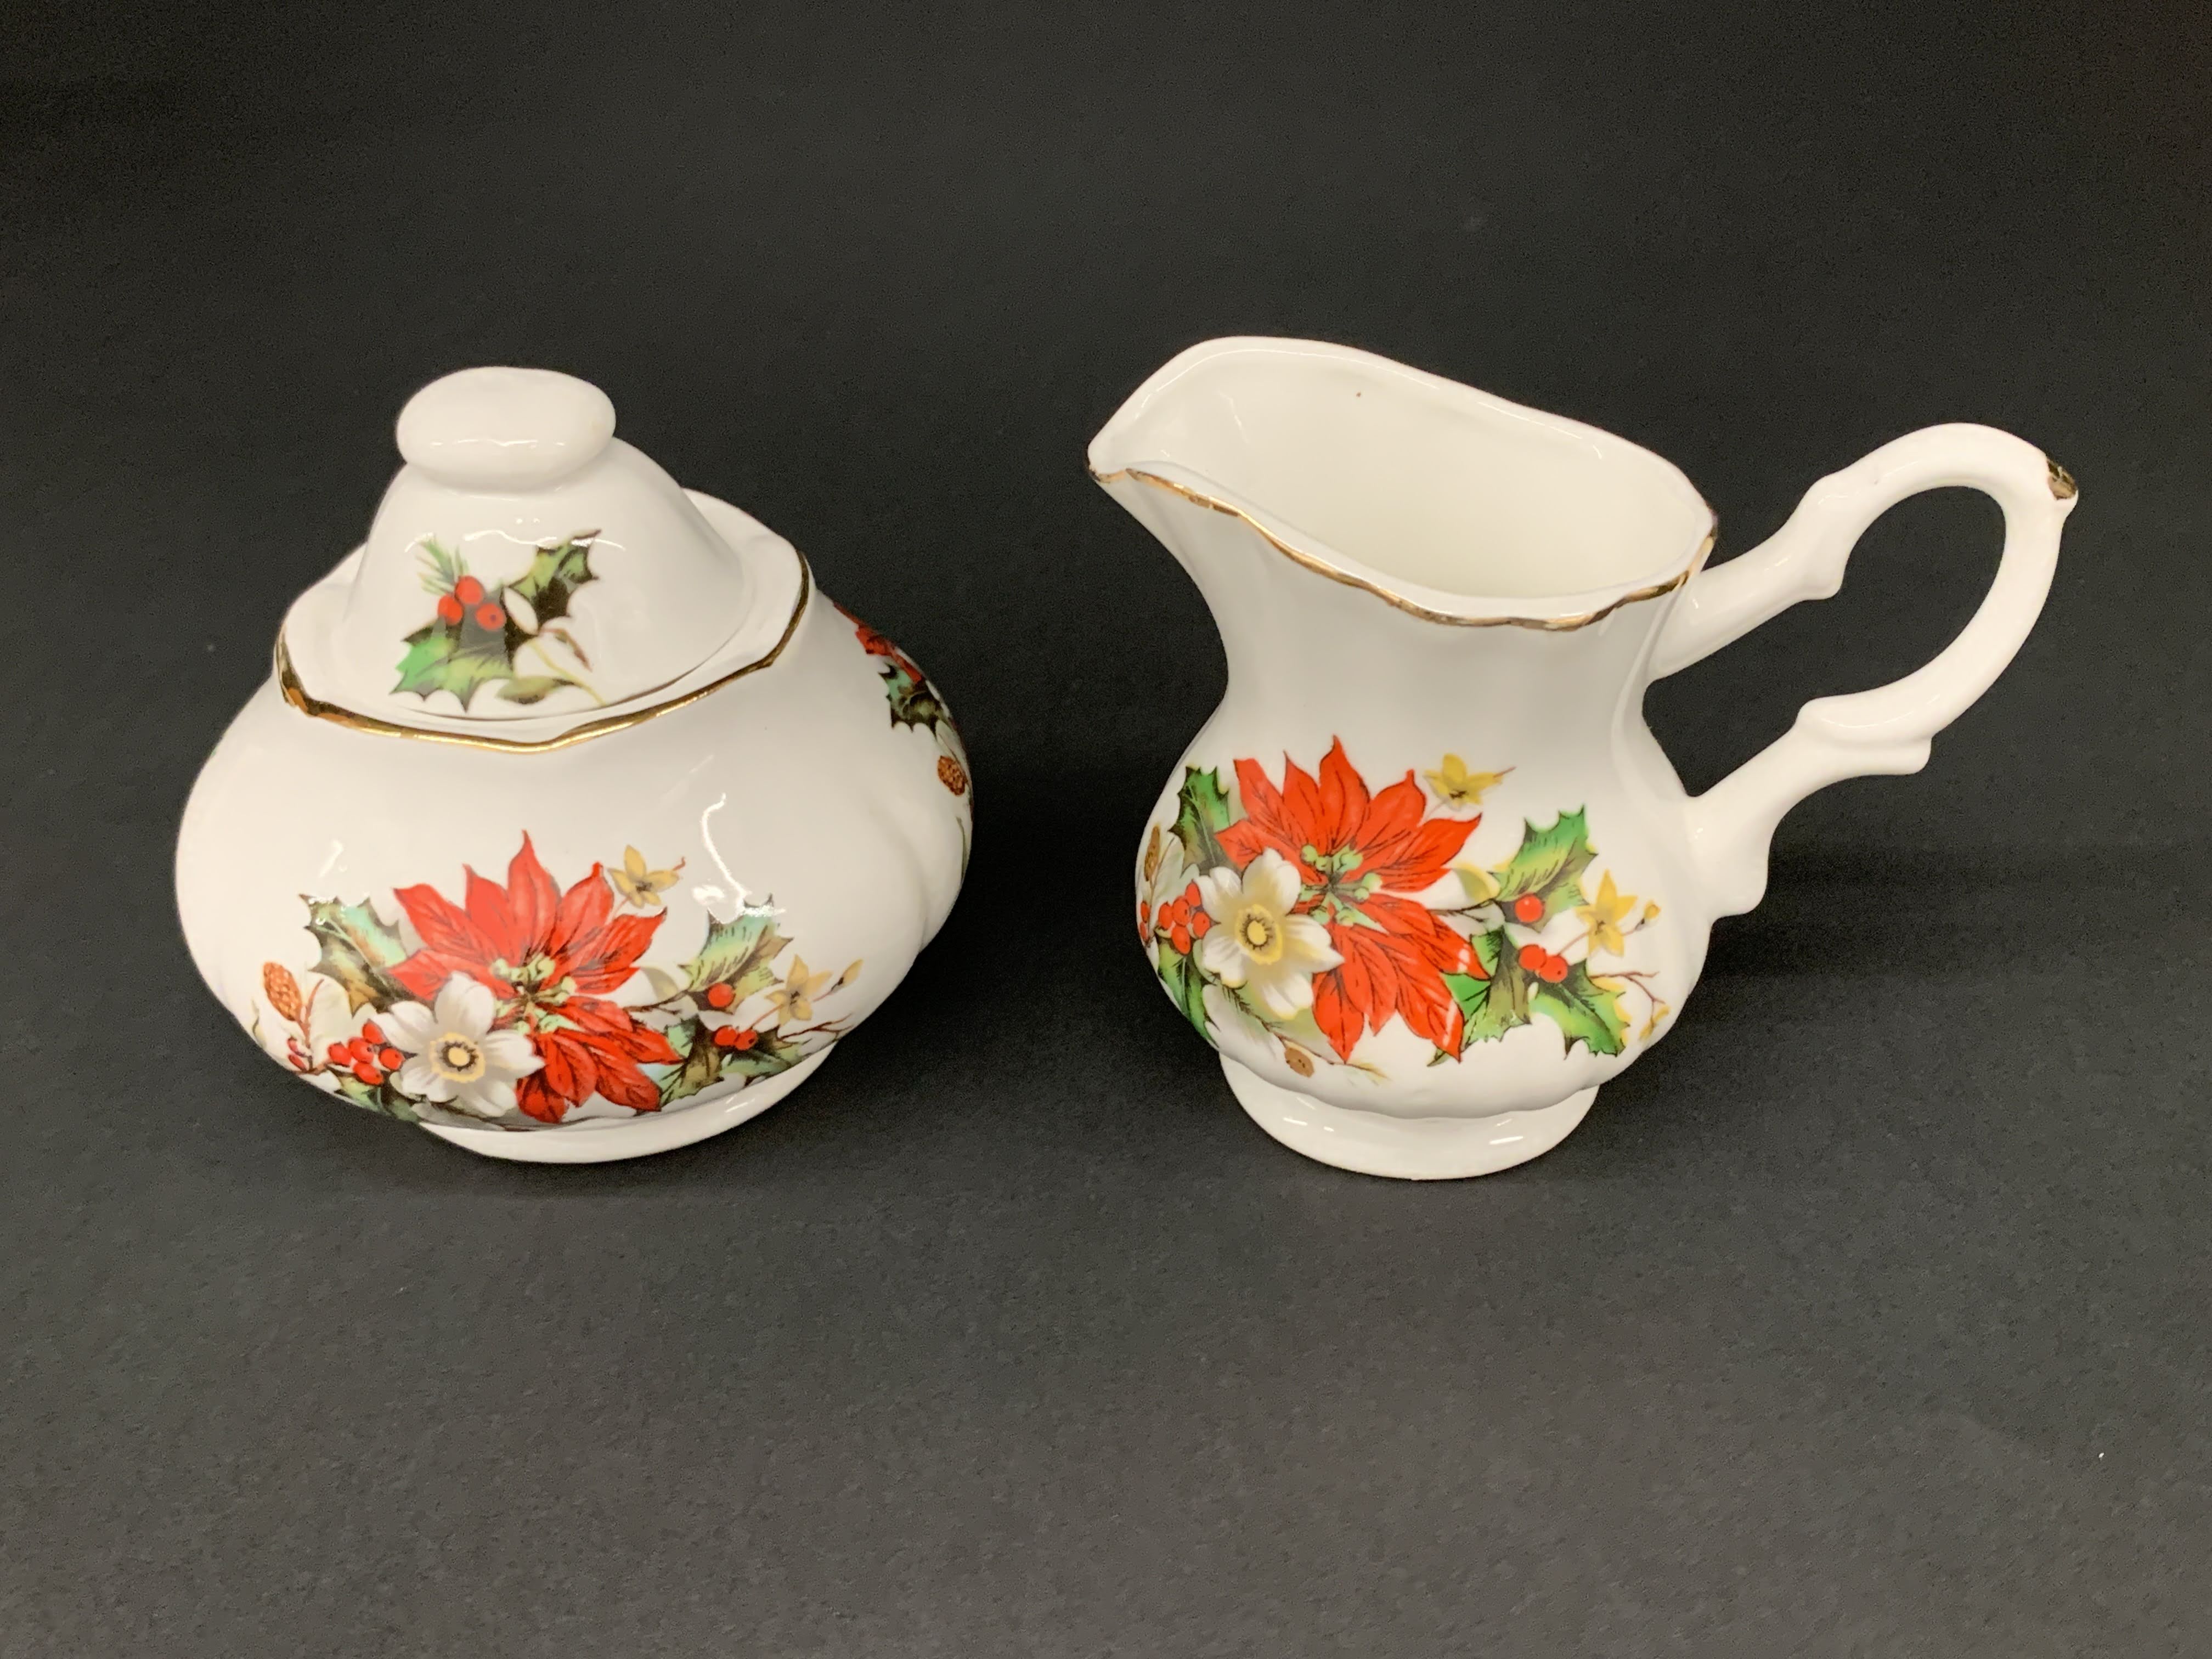 Holiday Holly Pattern - Mid Century Gold Trim Porcelain Fine China - Sugar Bowl And Creamer